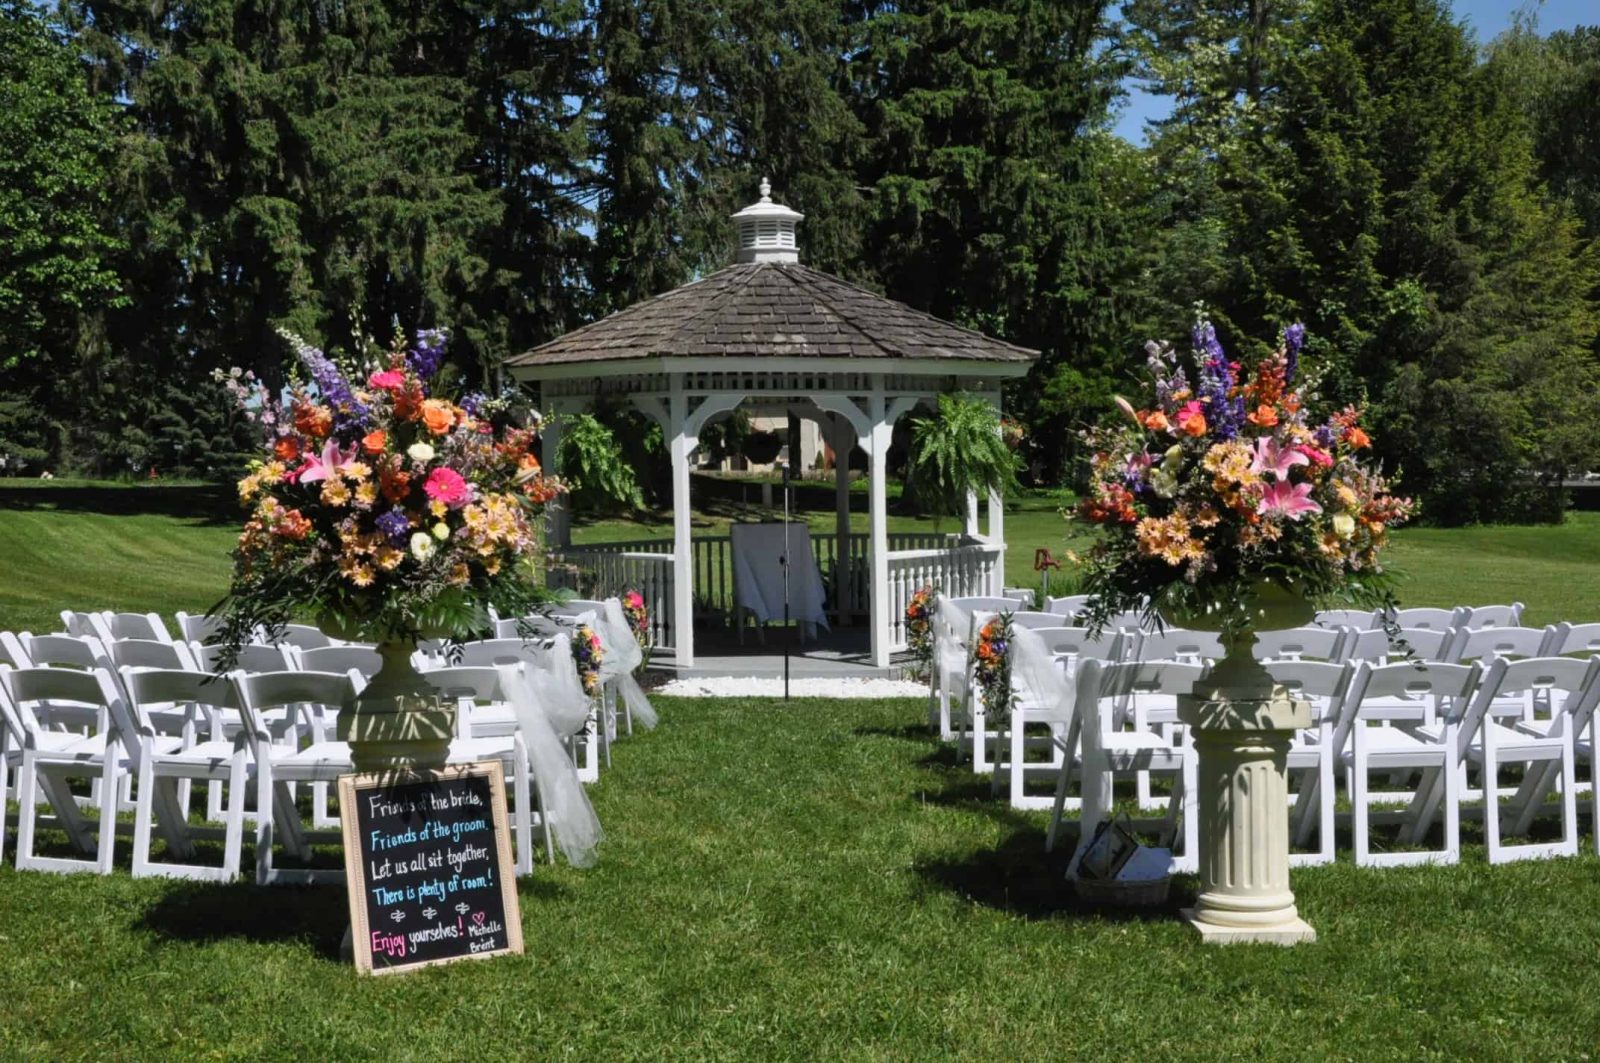 Colorful flowers and bright white chairs surround the front lawn gazebo